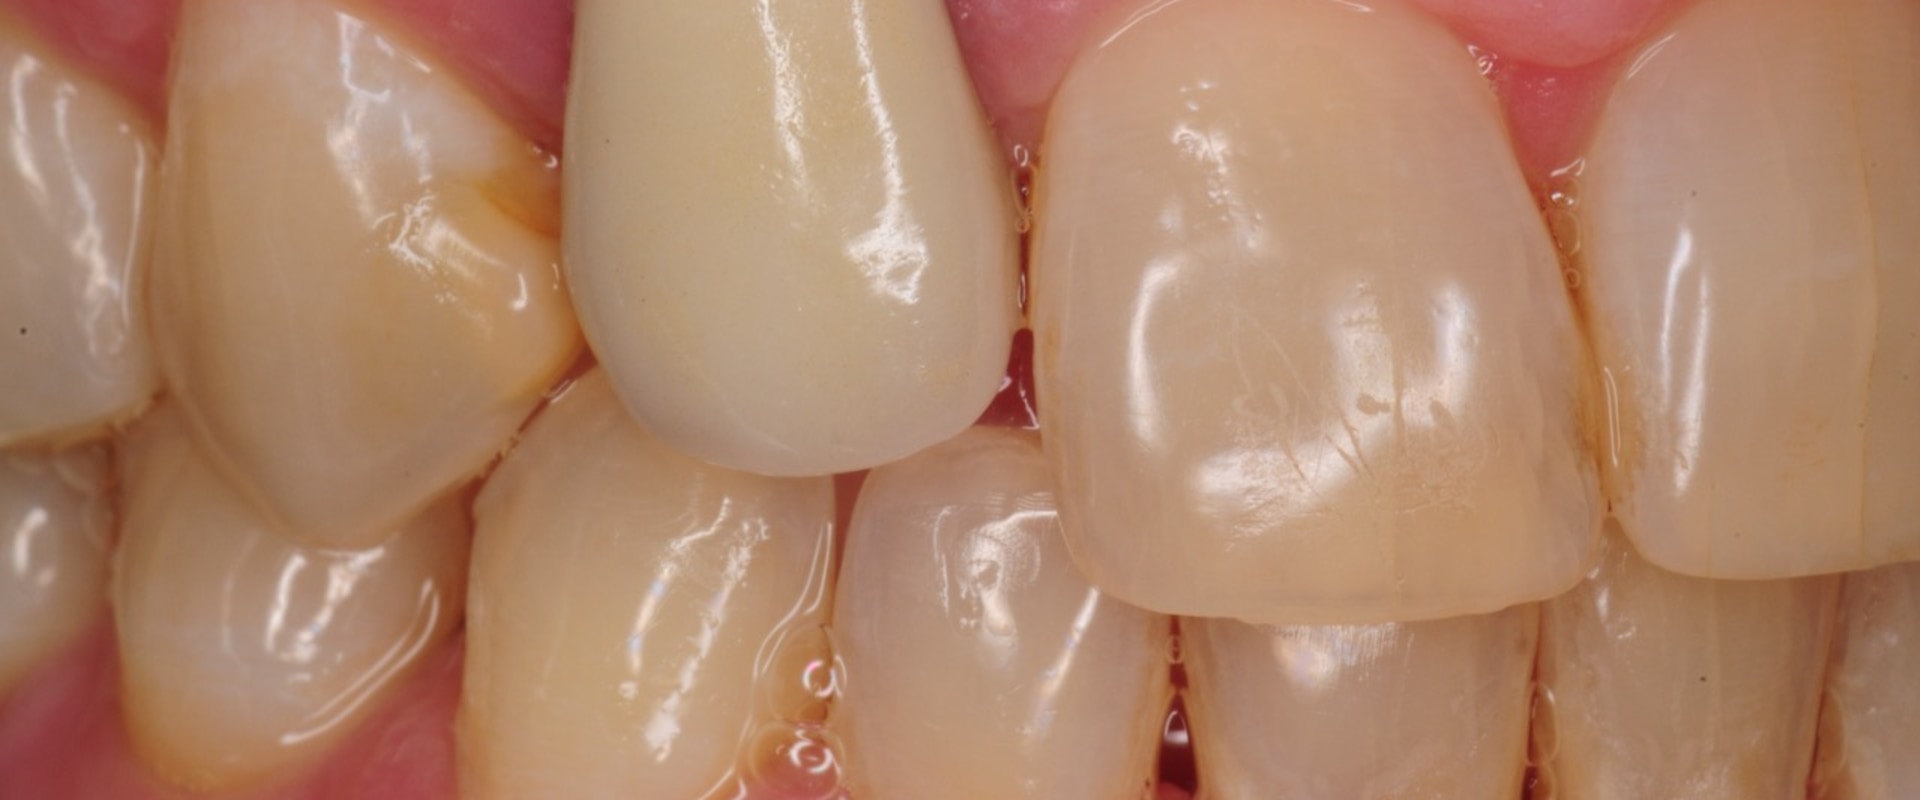 Dental Implant Infection: How Common Is It?